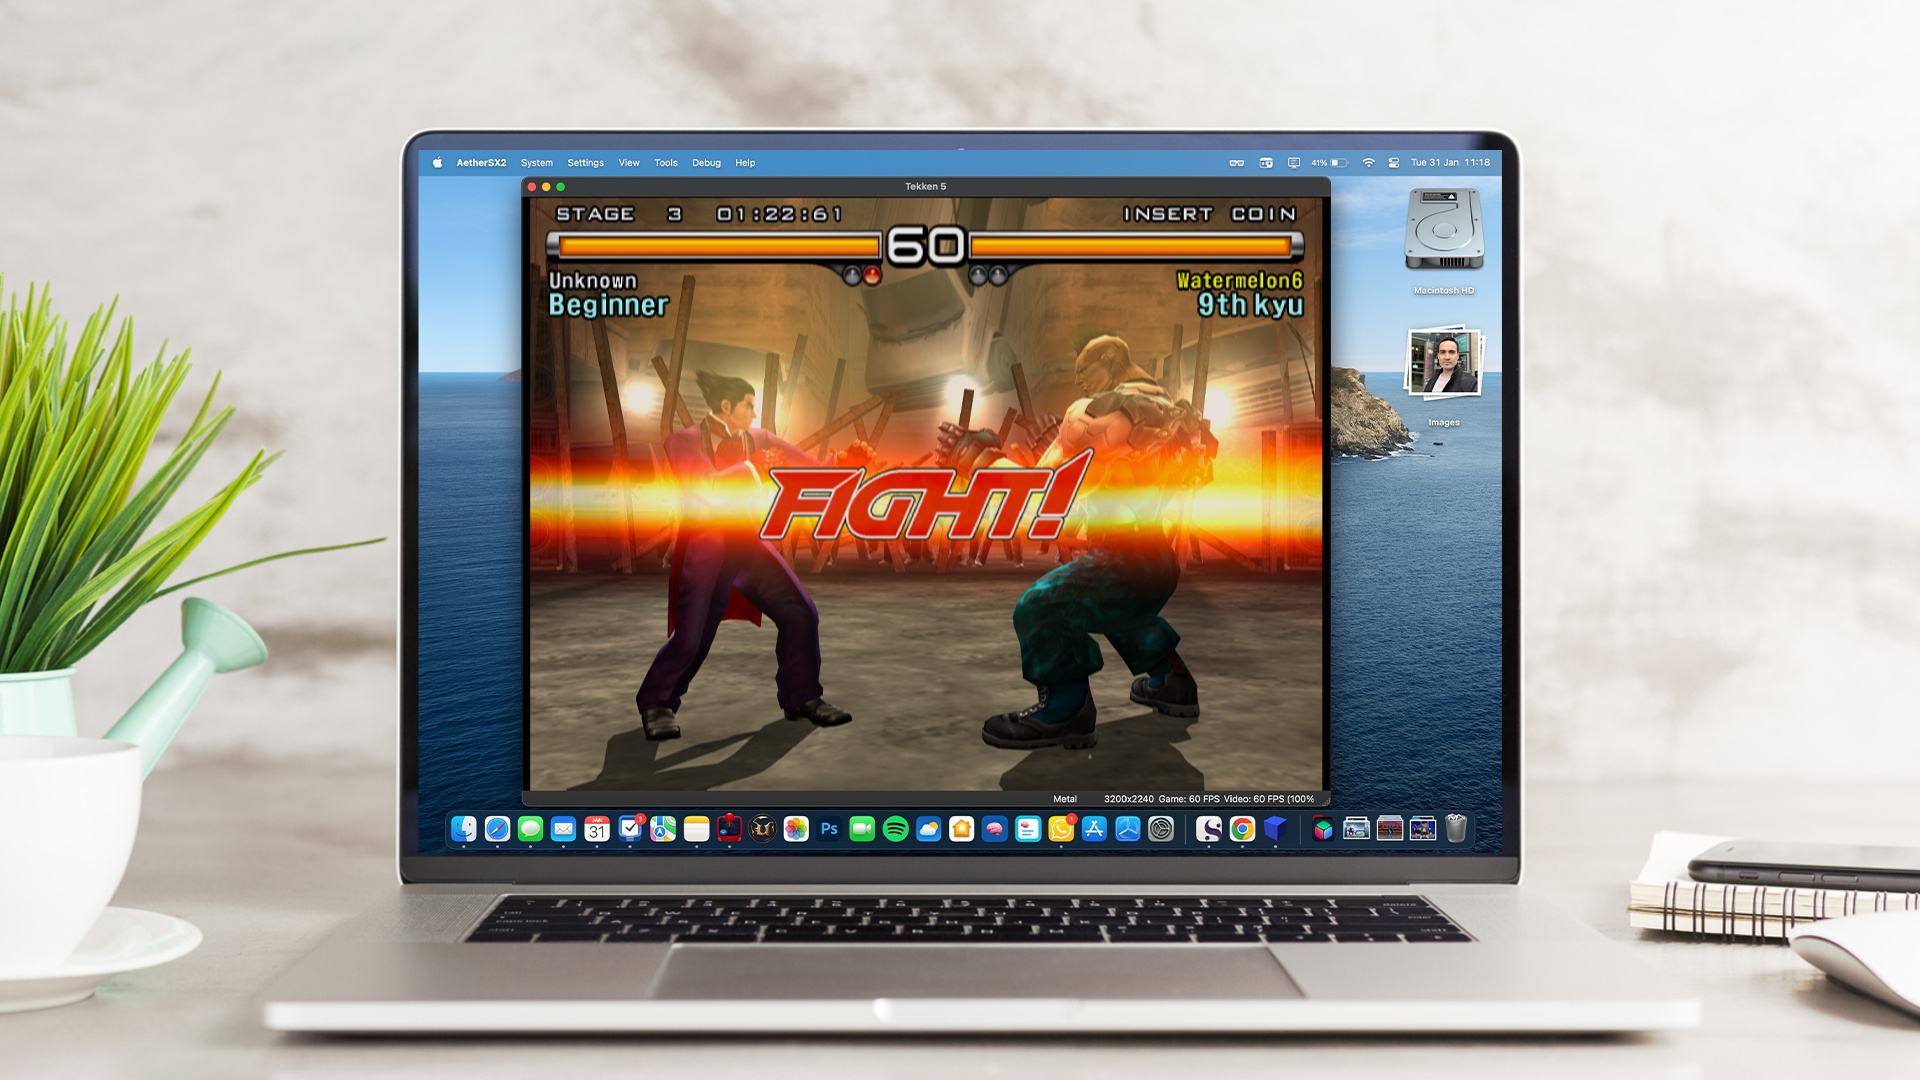 PS2 4K emulation on the M2 Pro Mac mini is real, and it's spectacular